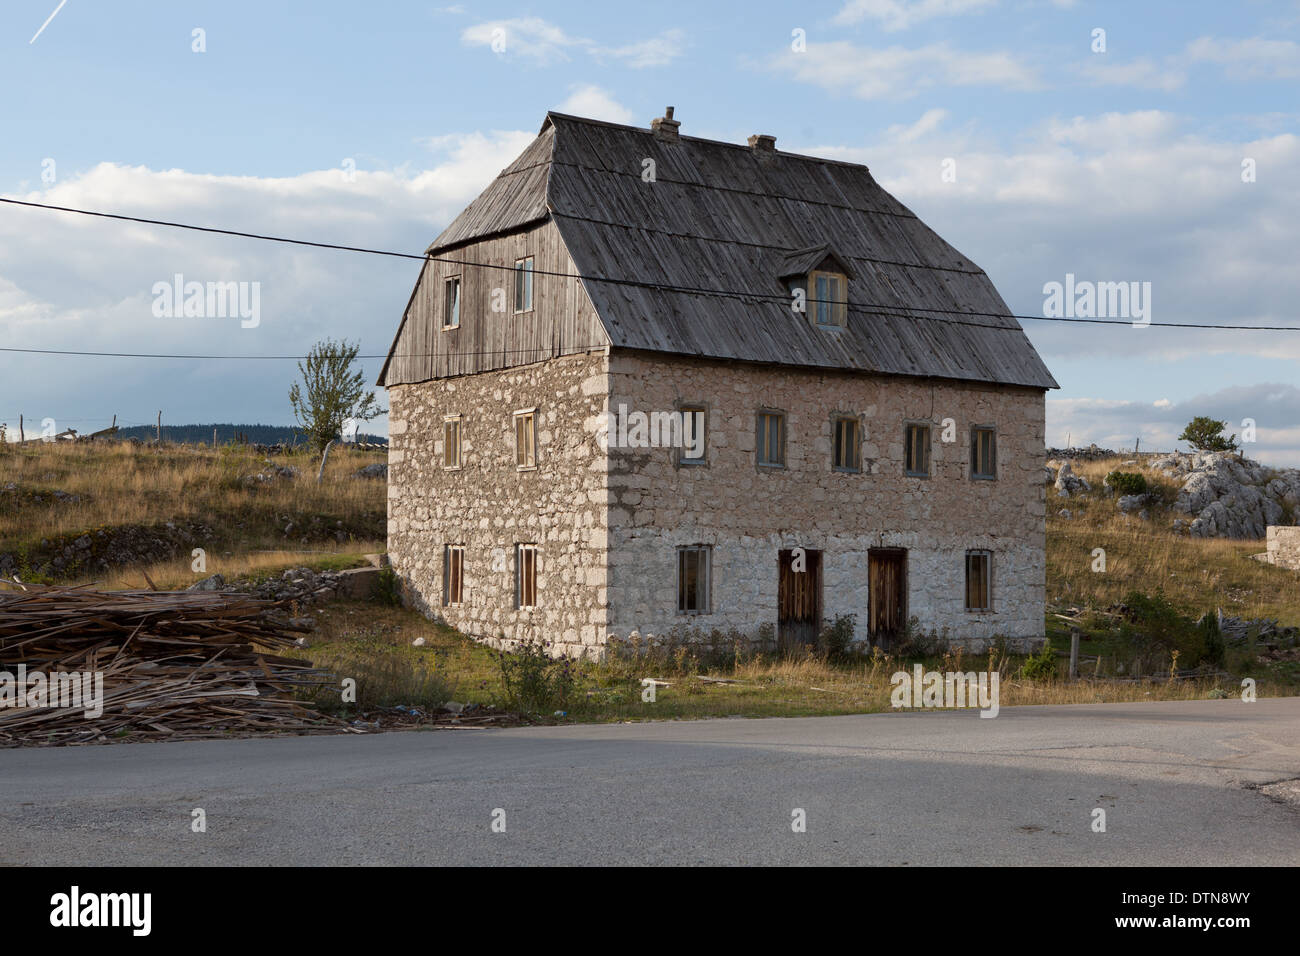 A typical house in traditional Montenegrin architecture, Njegovuda, Montenegro Stock Photo